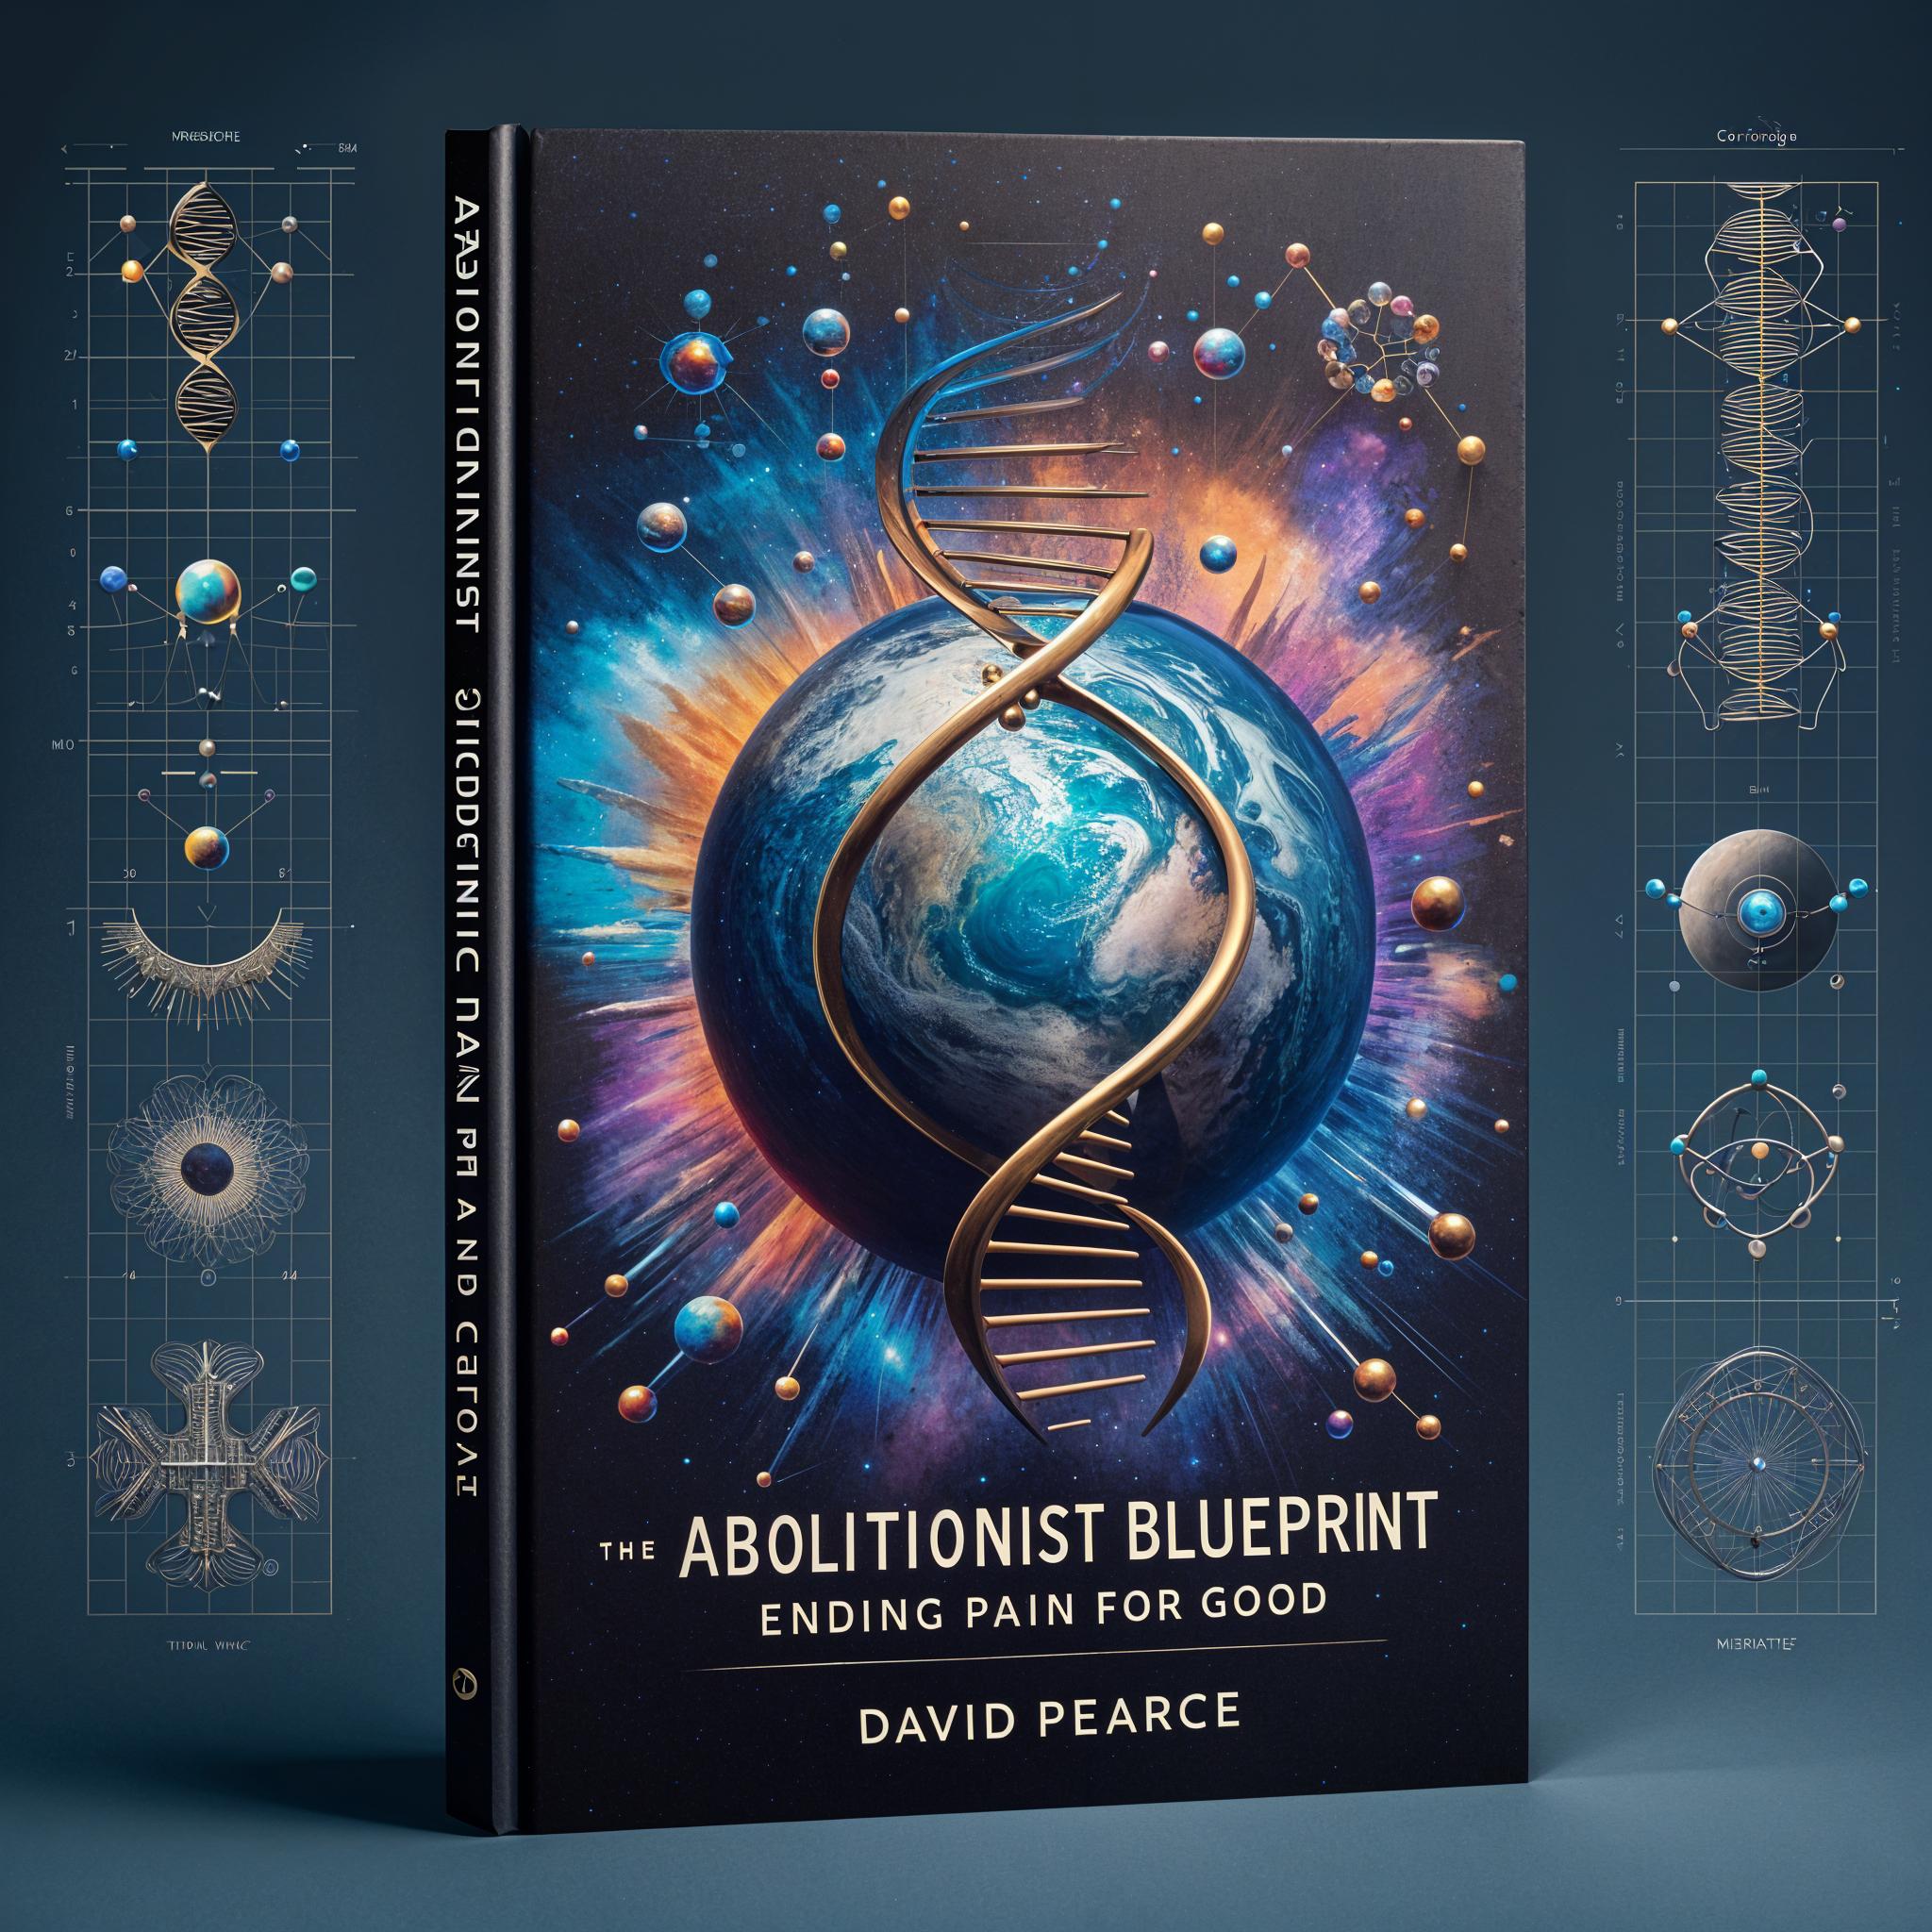 Abolitionist Blueprint by David Pearce